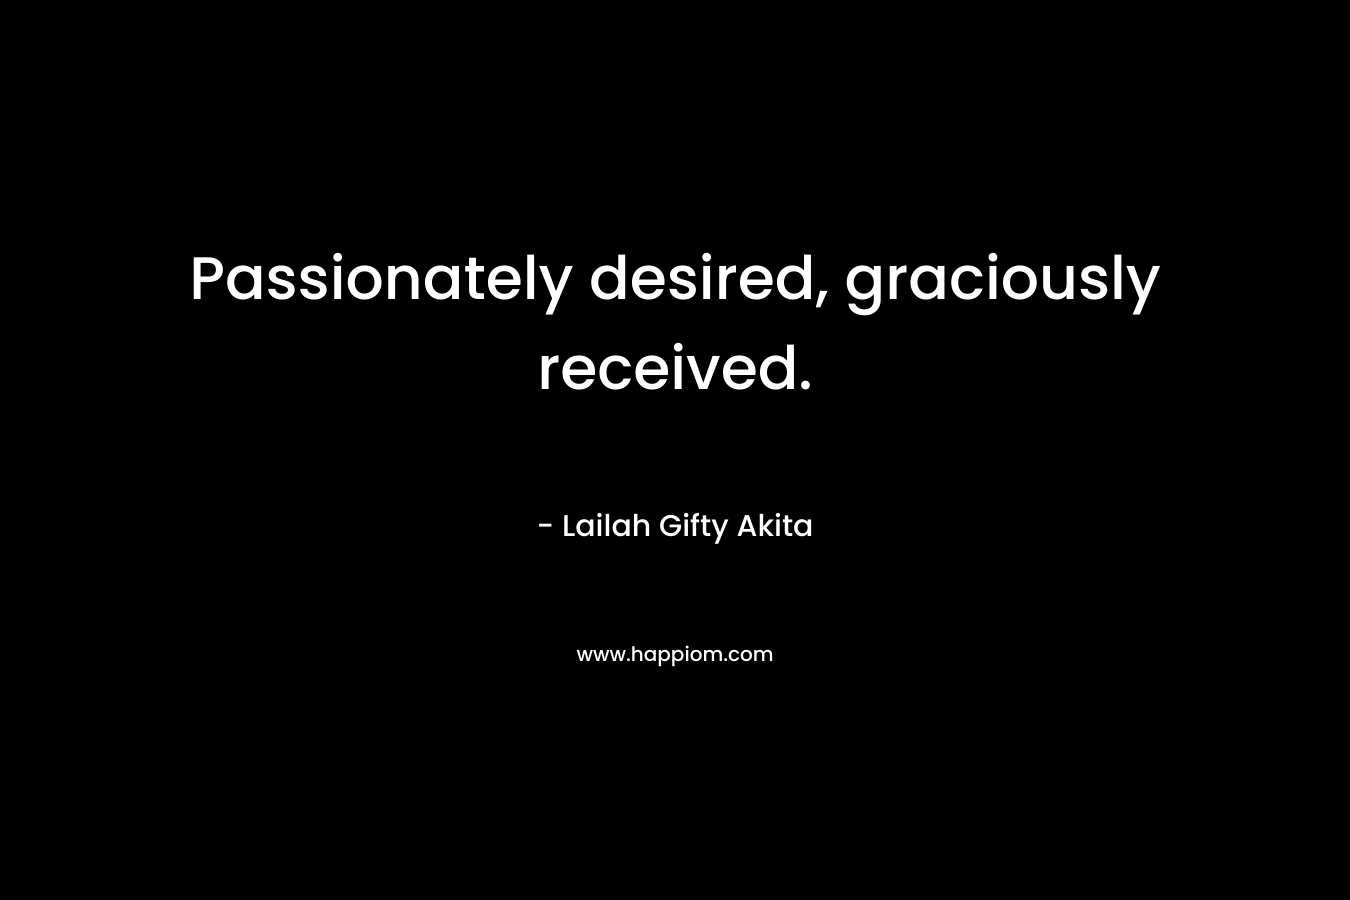 Passionately desired, graciously received.